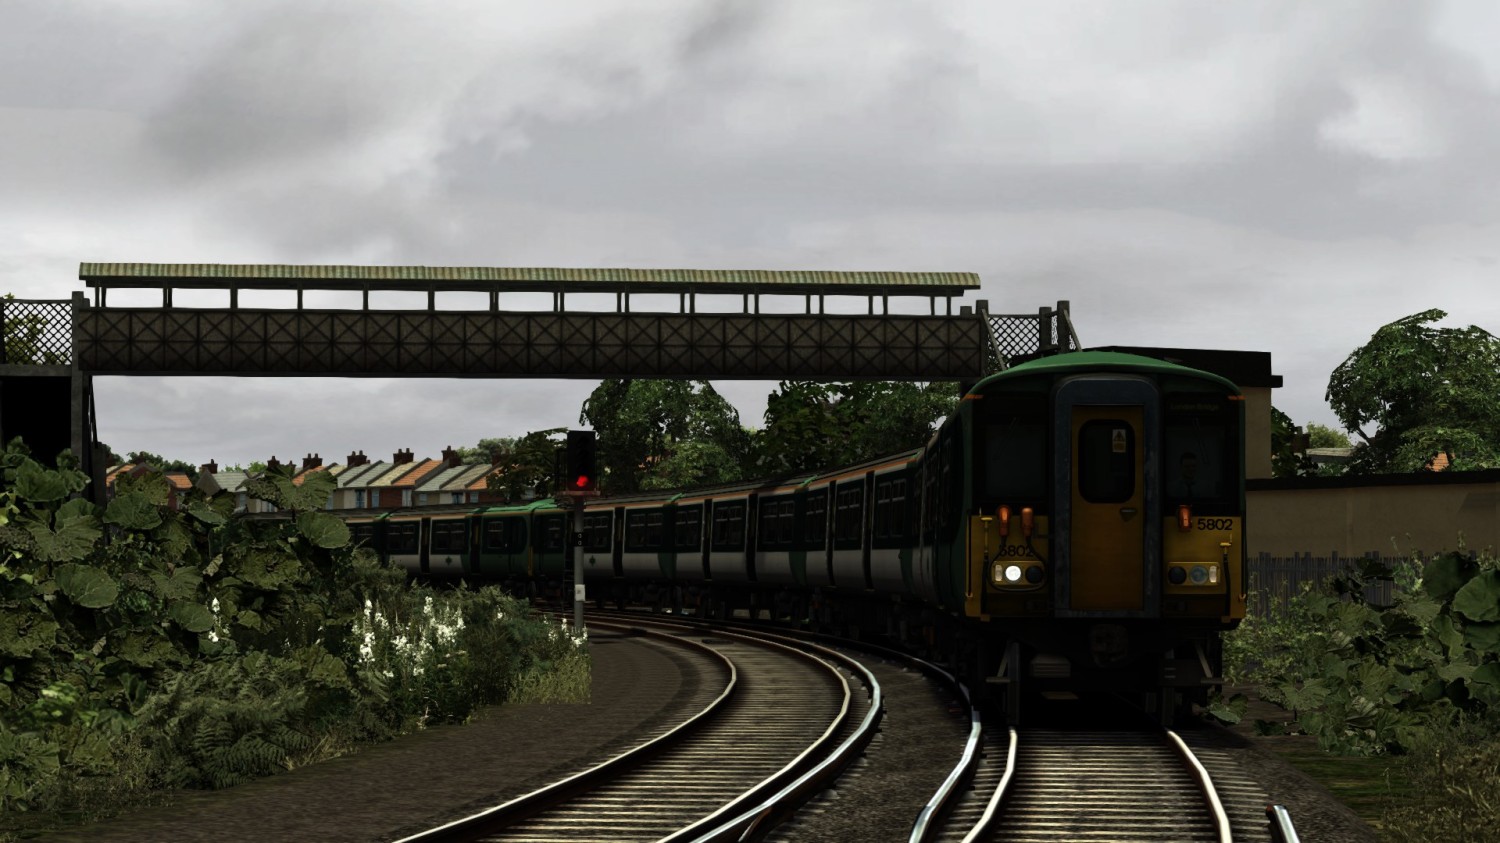 Image showing a screenshot taken on a scenario from the free South London Network scenario pack from DPSimulation